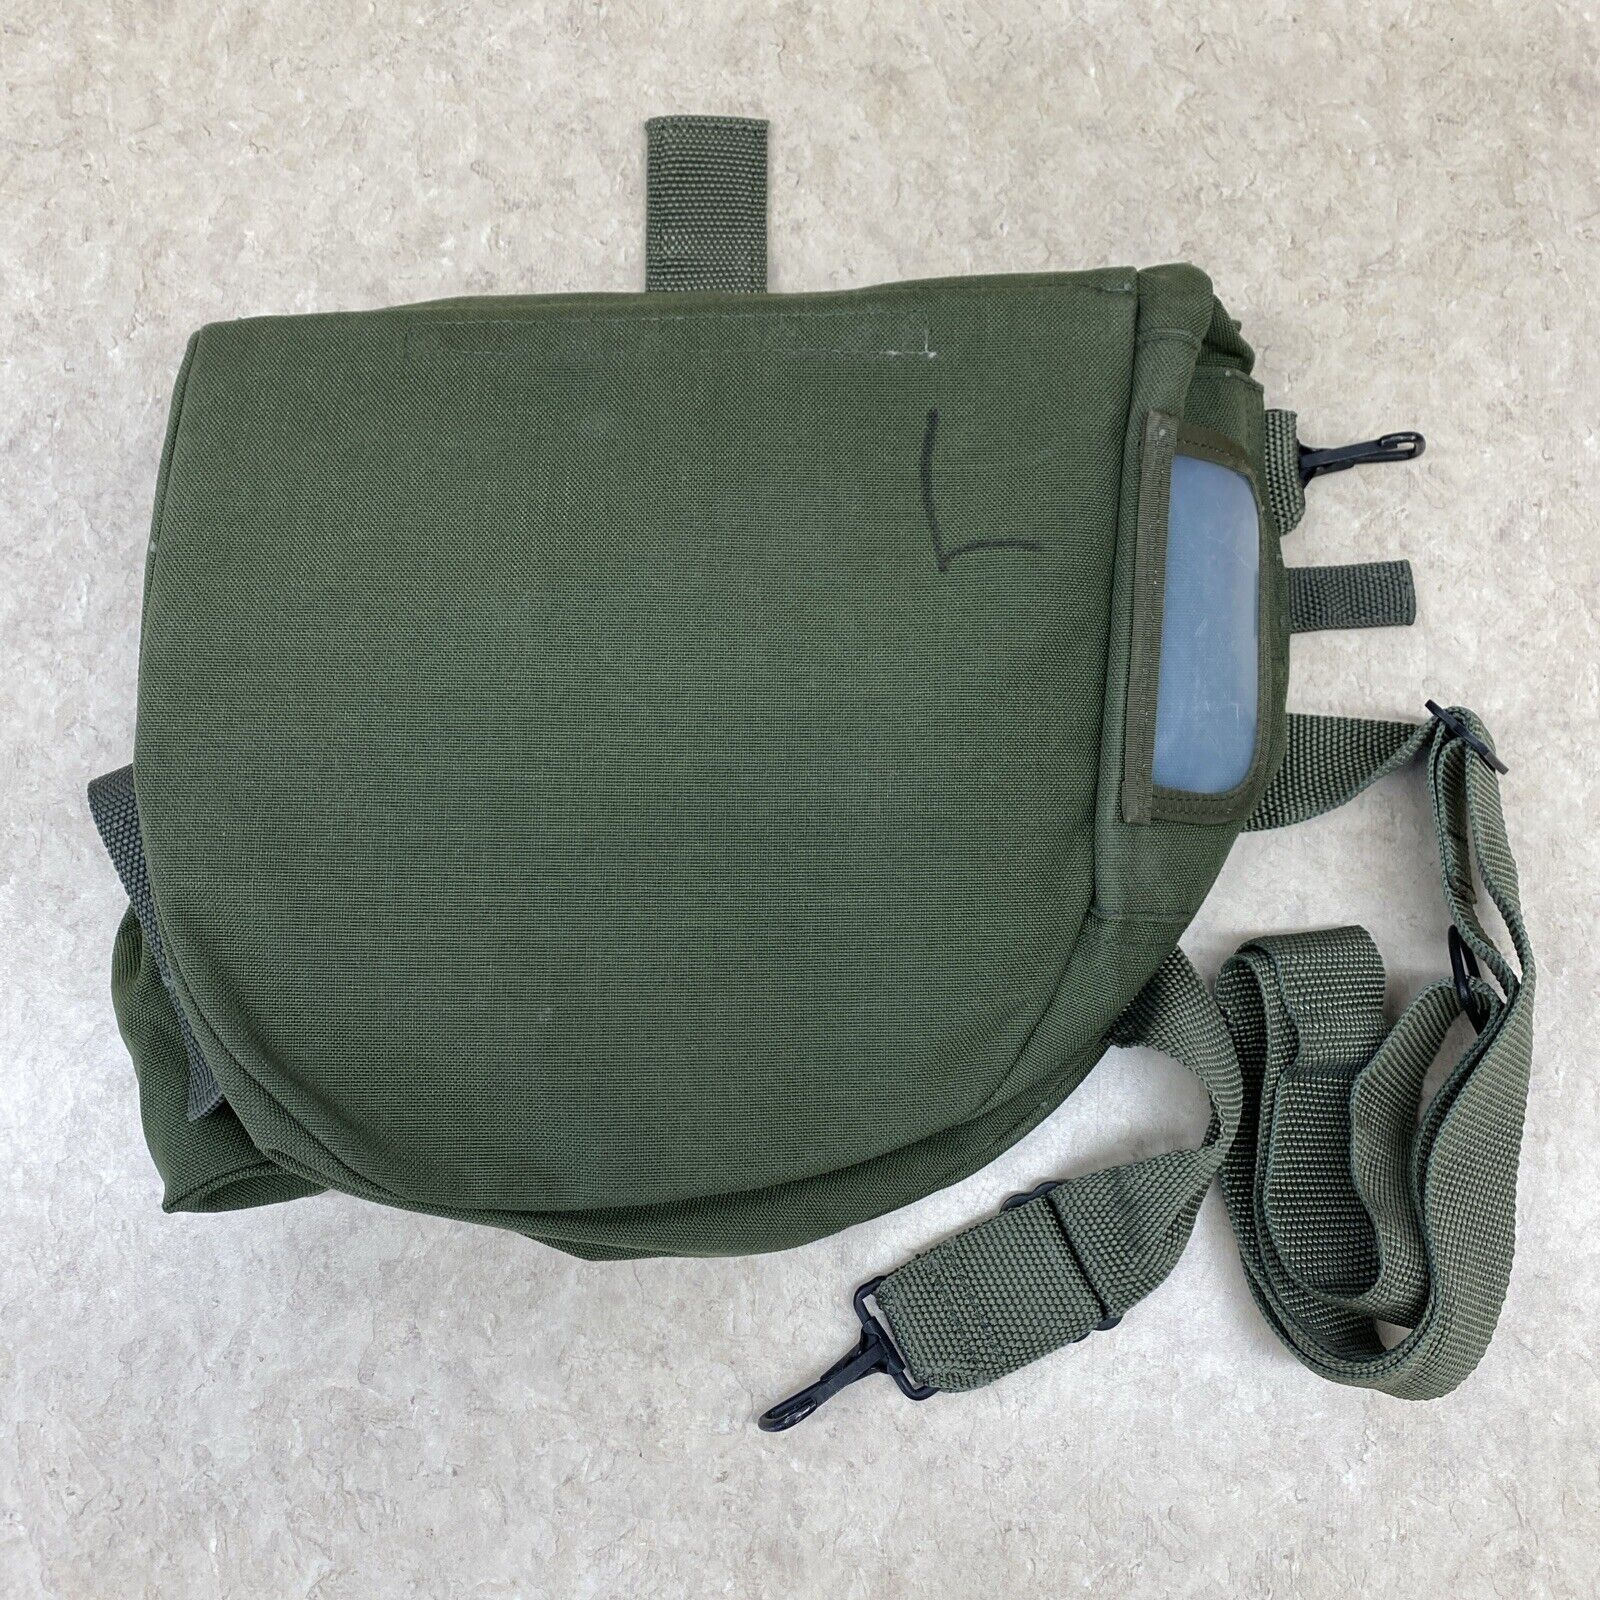 USGI MILITARY M40 SERIES GAS MASK BAG OD GREEN CARRIER ARMY PACK HAVERSACK